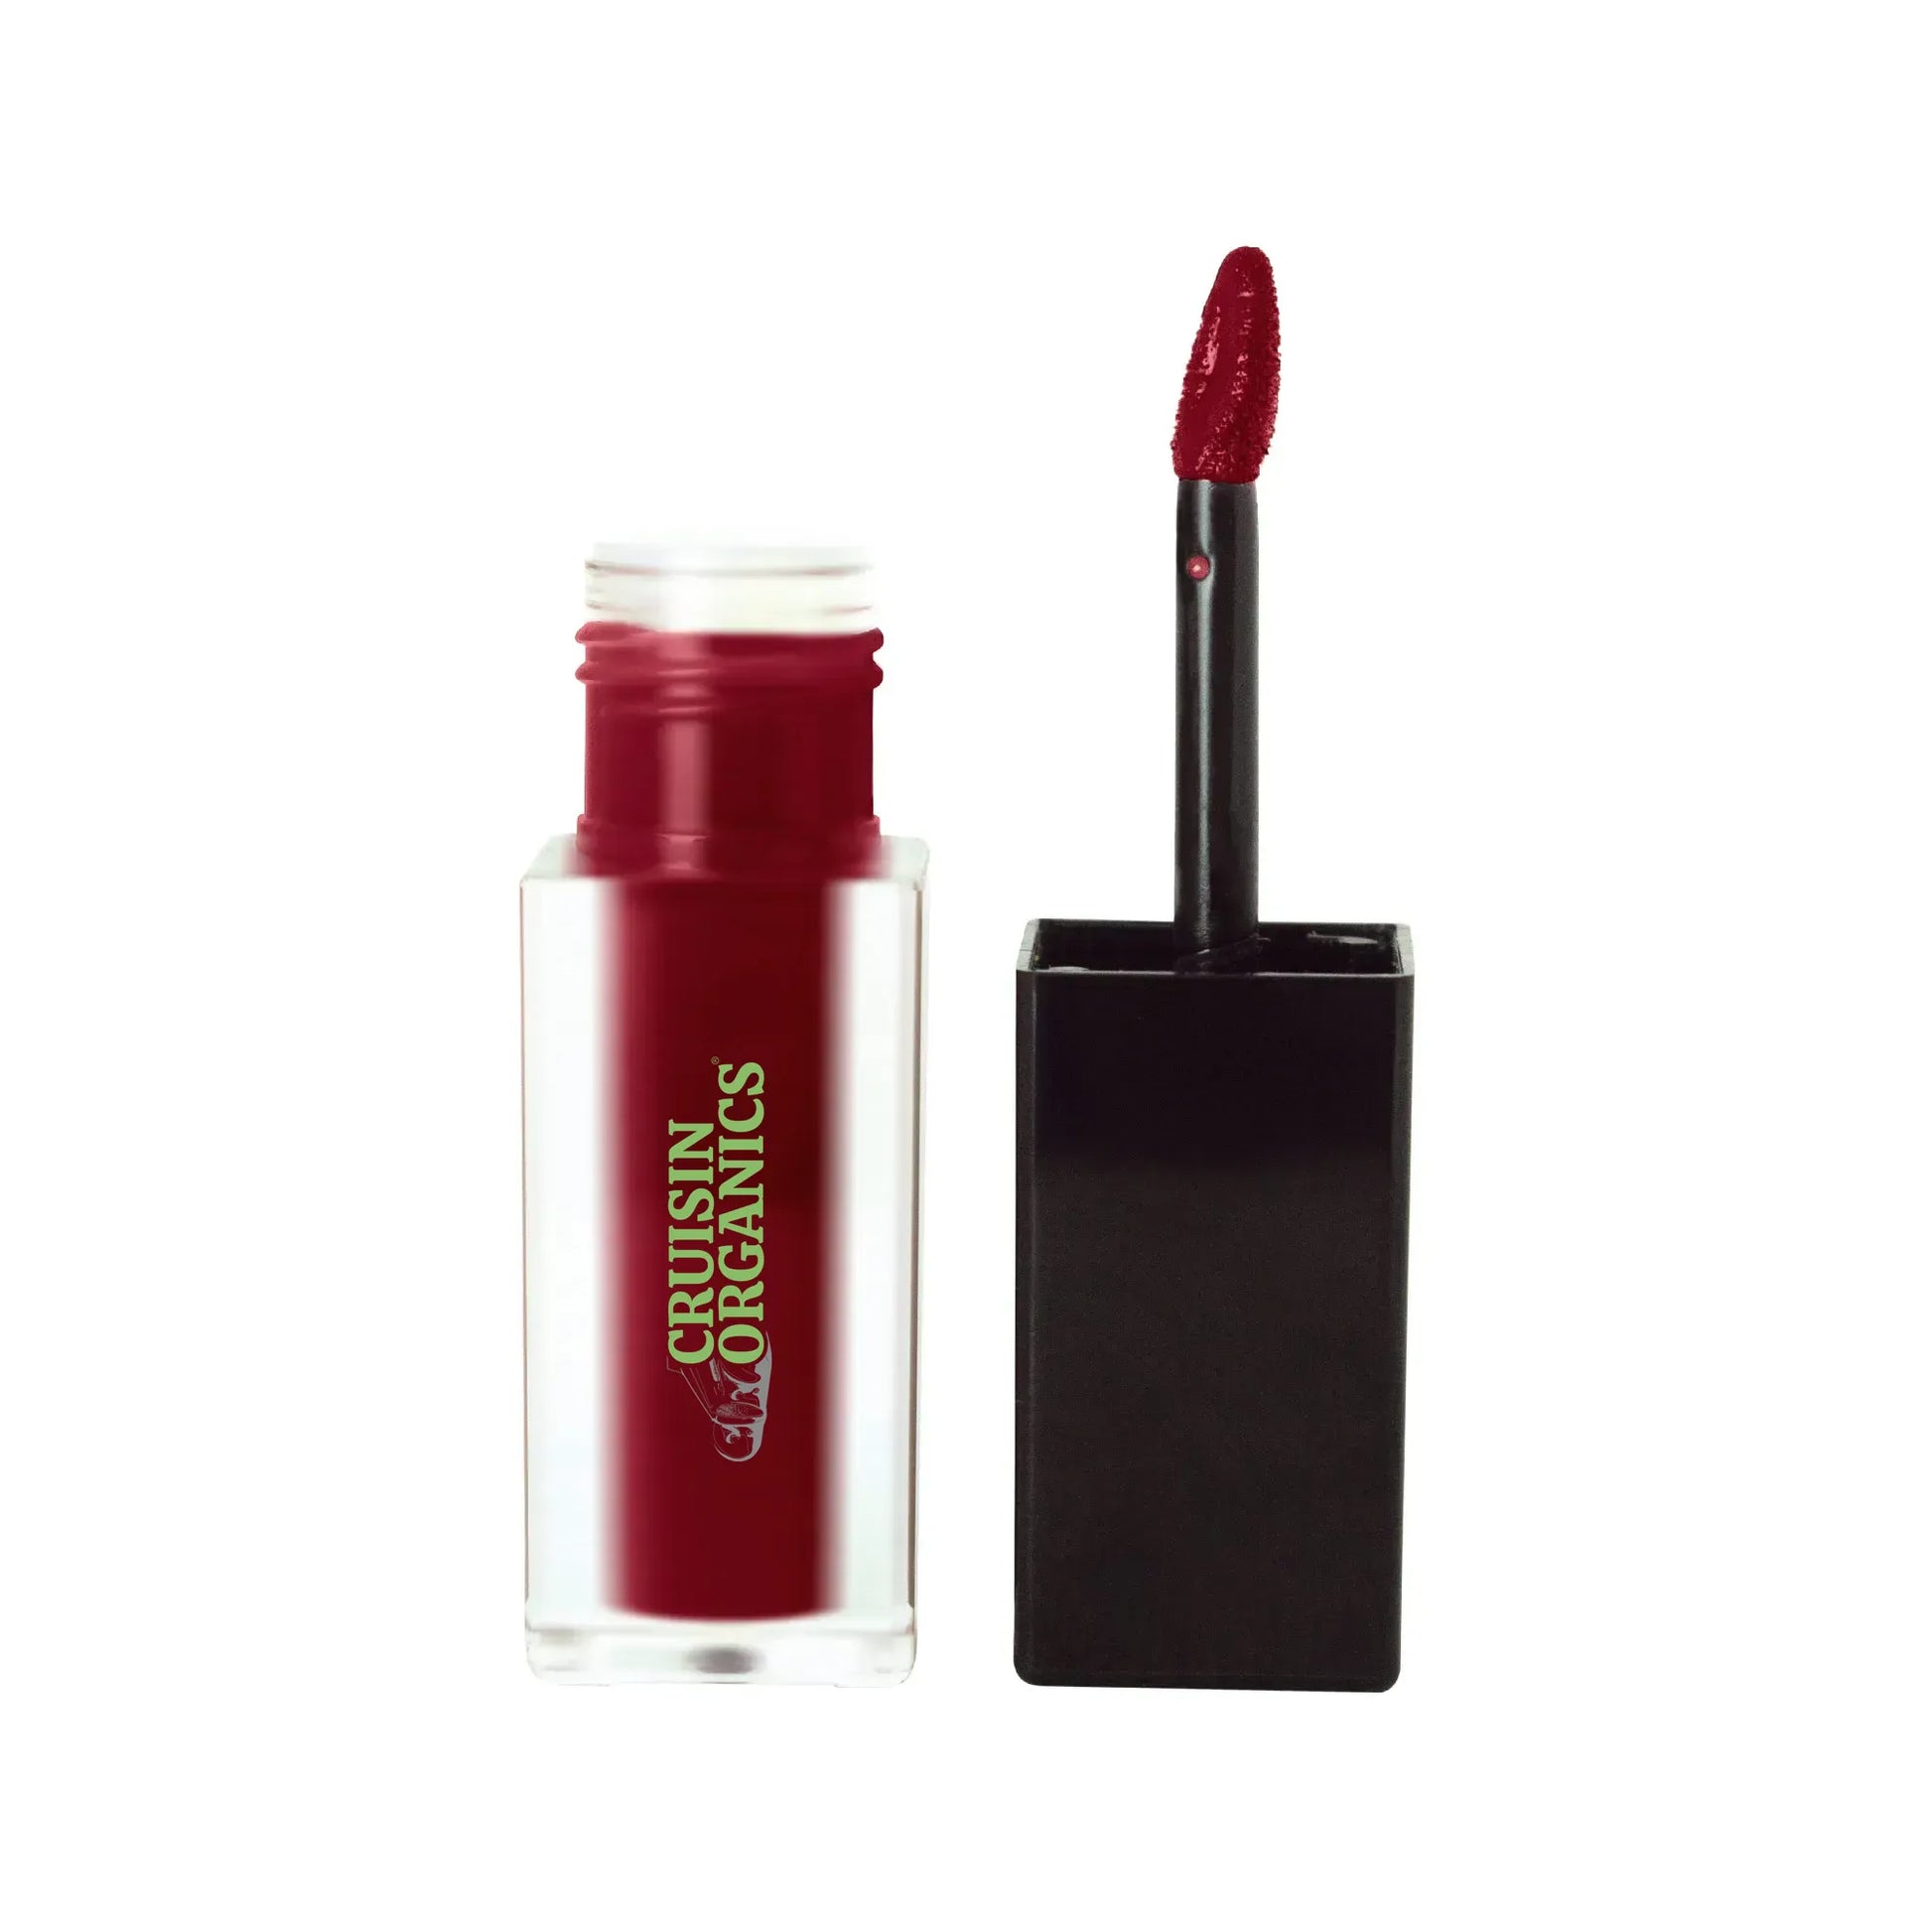 Accentuate your desired color with Cruisin Organics Dark Sienna matte lip stain. Made with vitamin E for a milky finish.